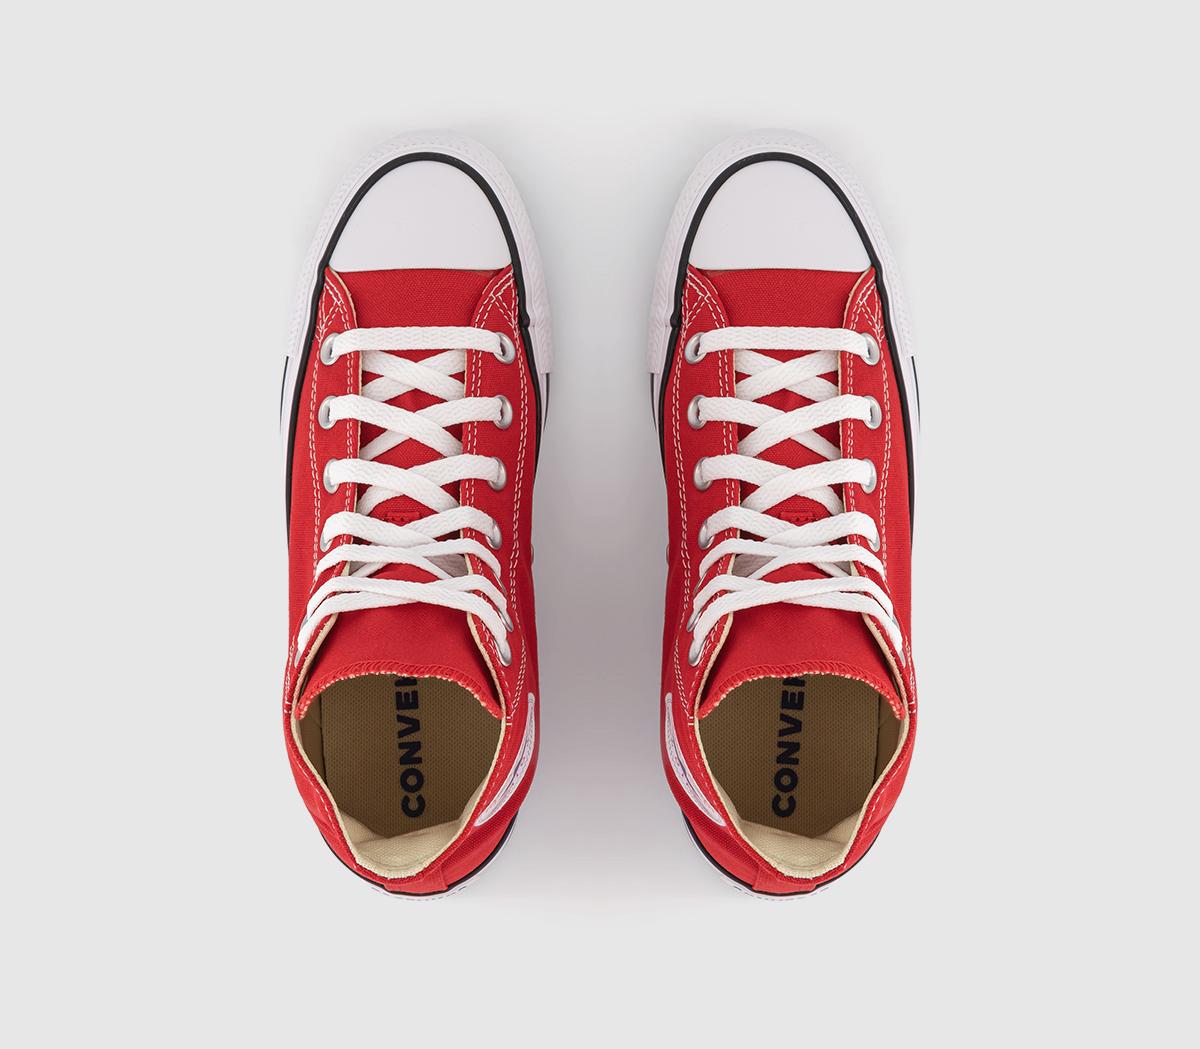 Converse All Star Hi Trainers Red Canvas - Unisex Sports